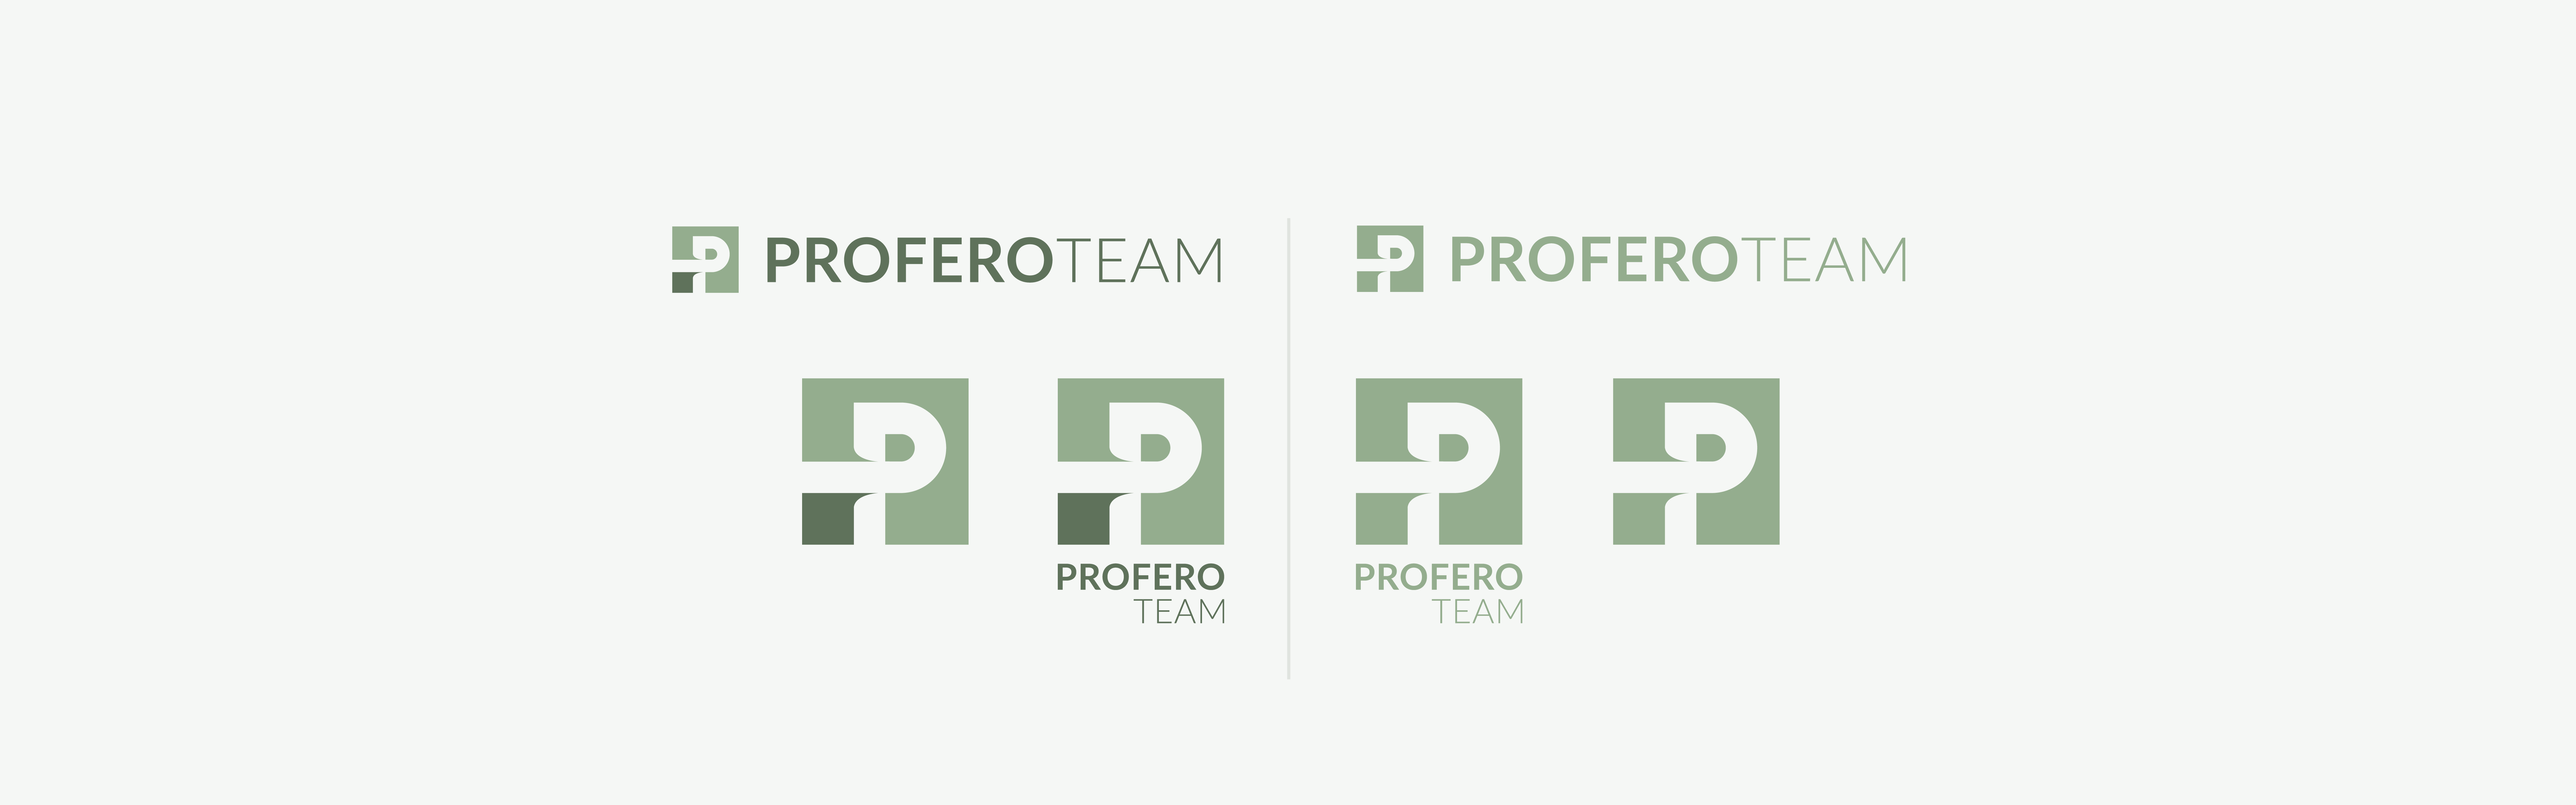 The image displays a series of six iterations of a logo for "Profero Team" with varying degrees of simplification from complex to minimalistic, demonstrating the evolution of the design in a monoch